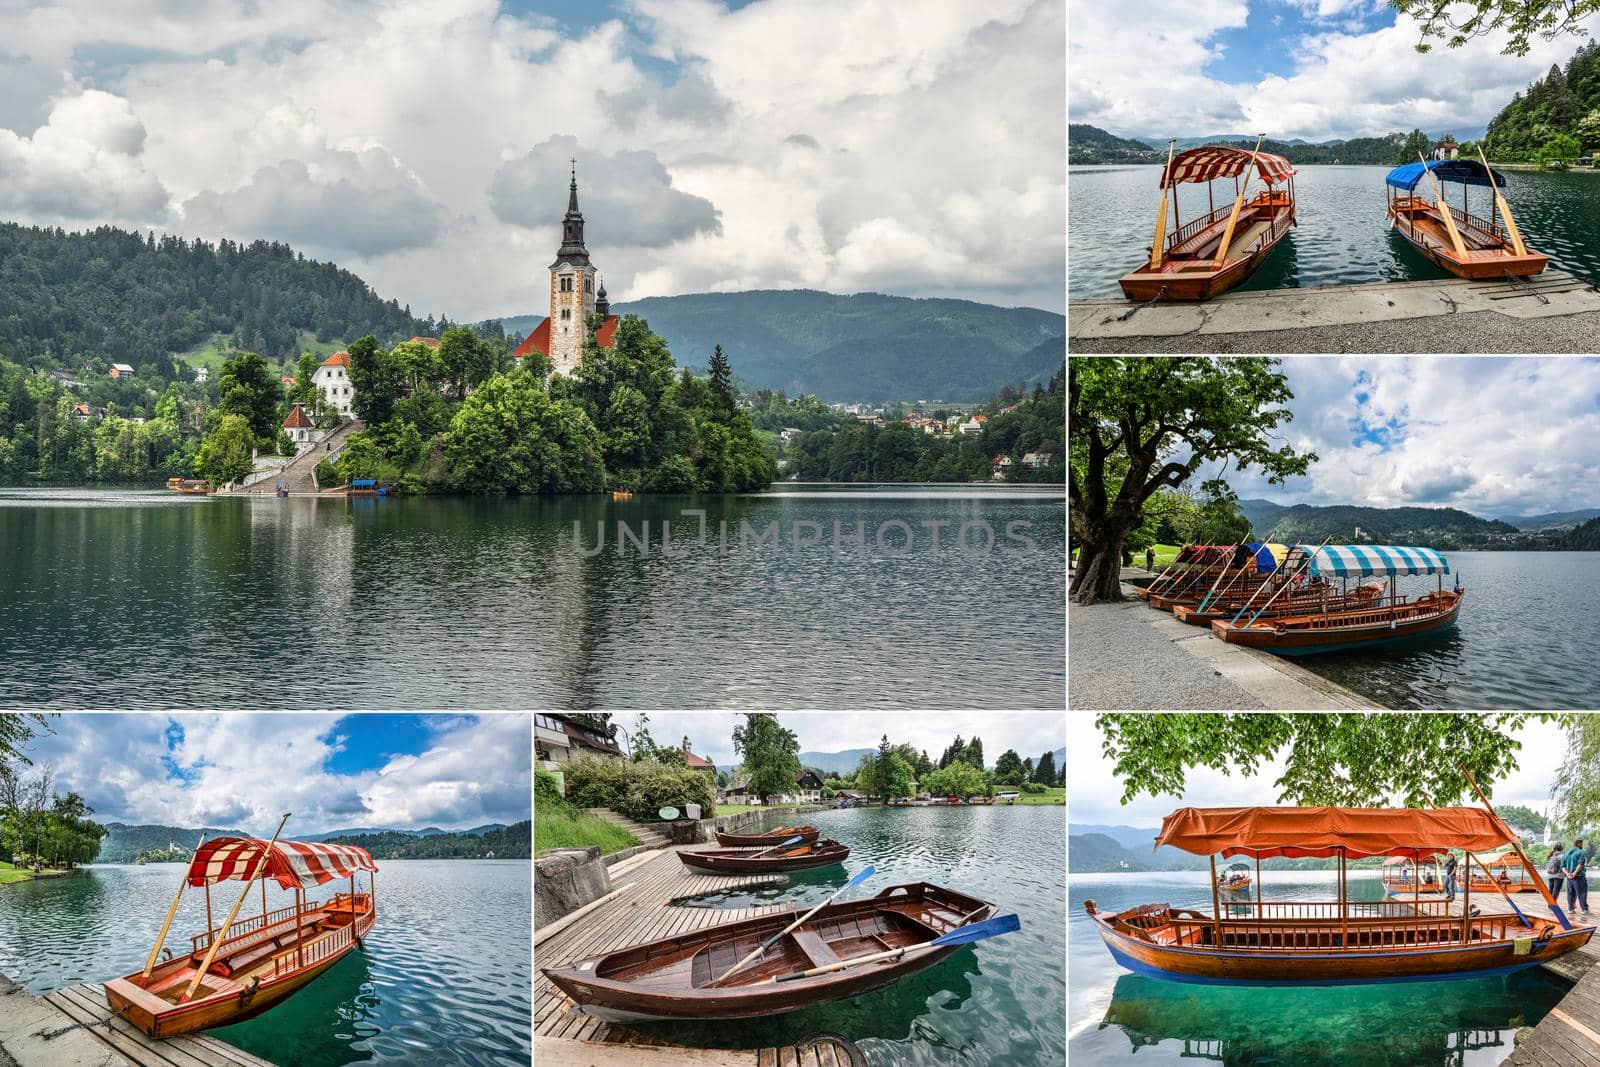 Bled, Slovenia - December 22, 2019: Collage of landmarks of Bled lake and town, Slovenia